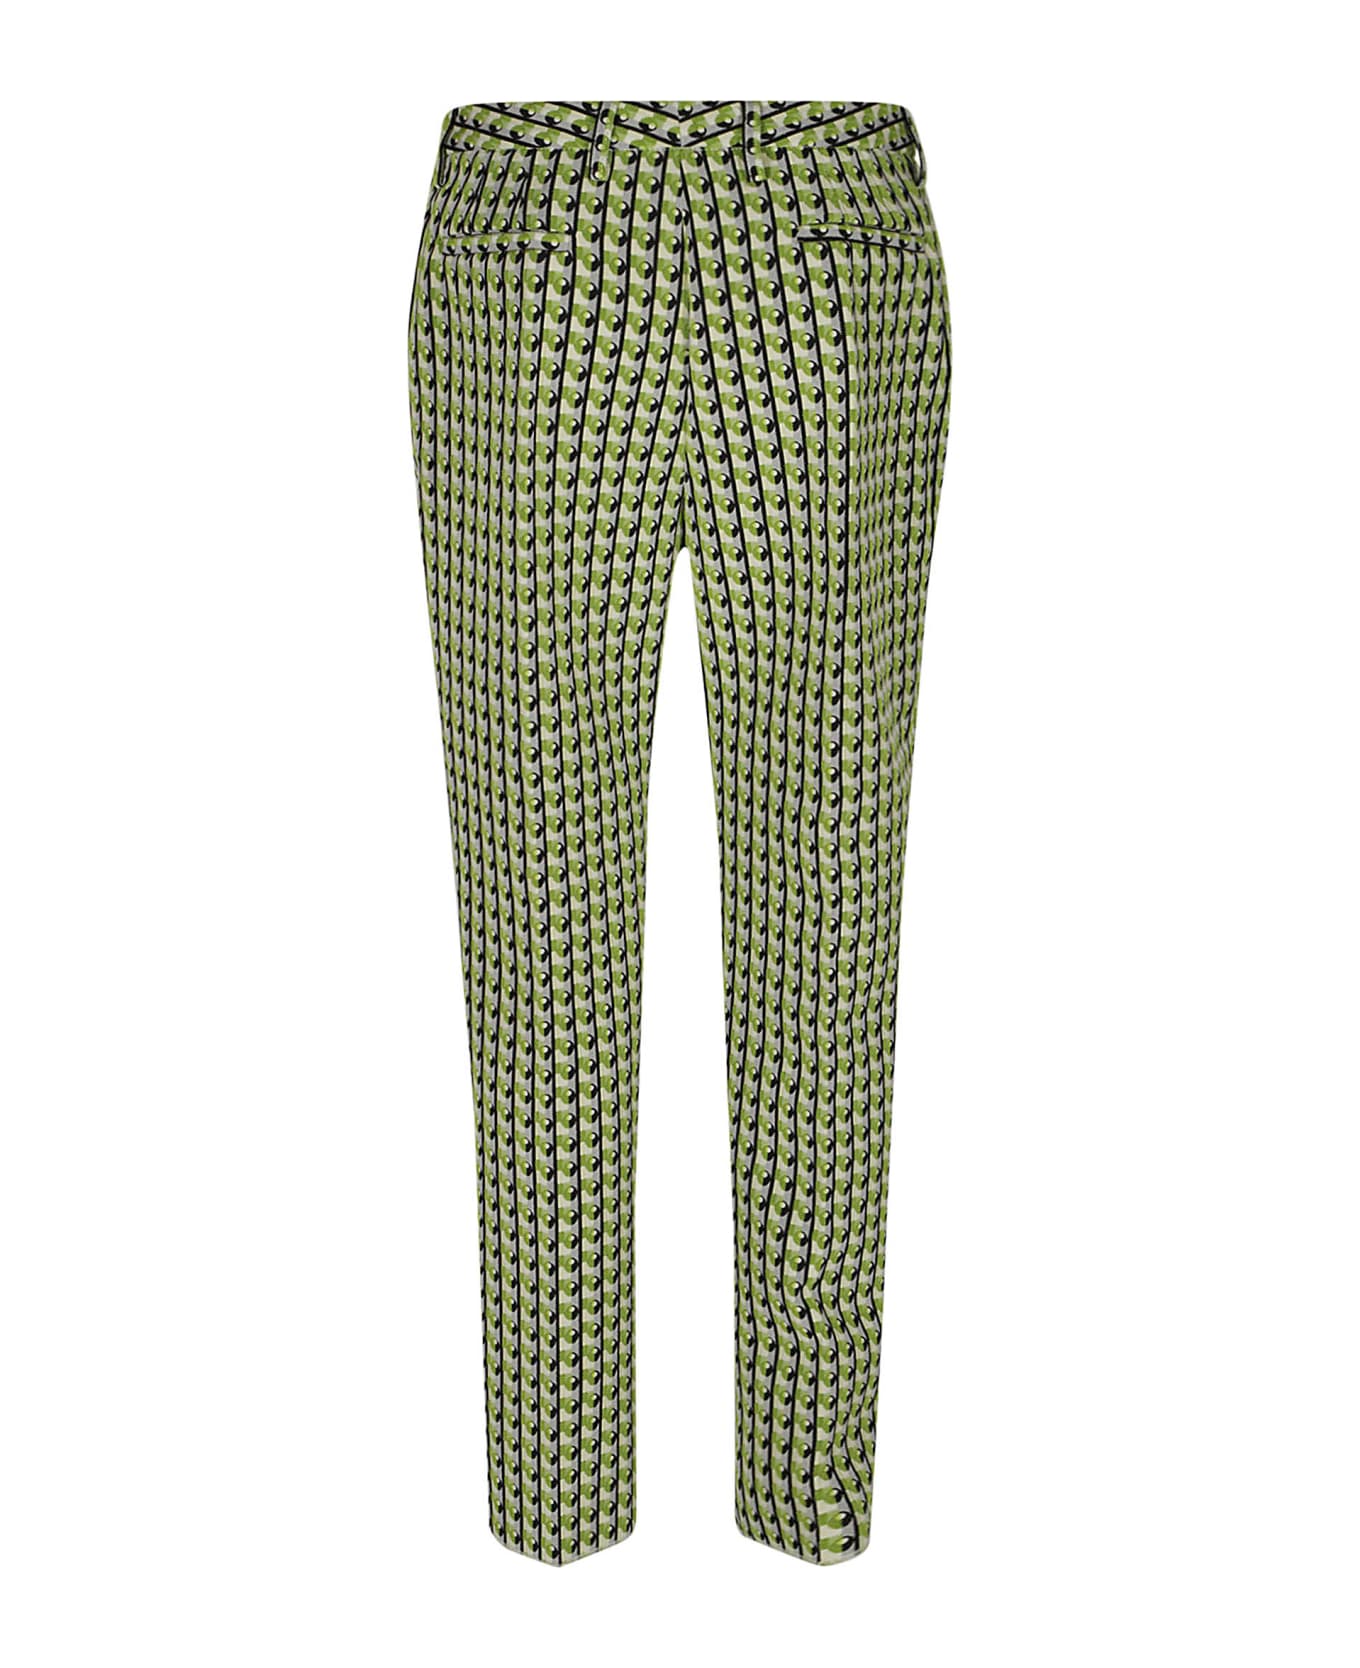 Etro All-over Printed Slim Trousers - Green